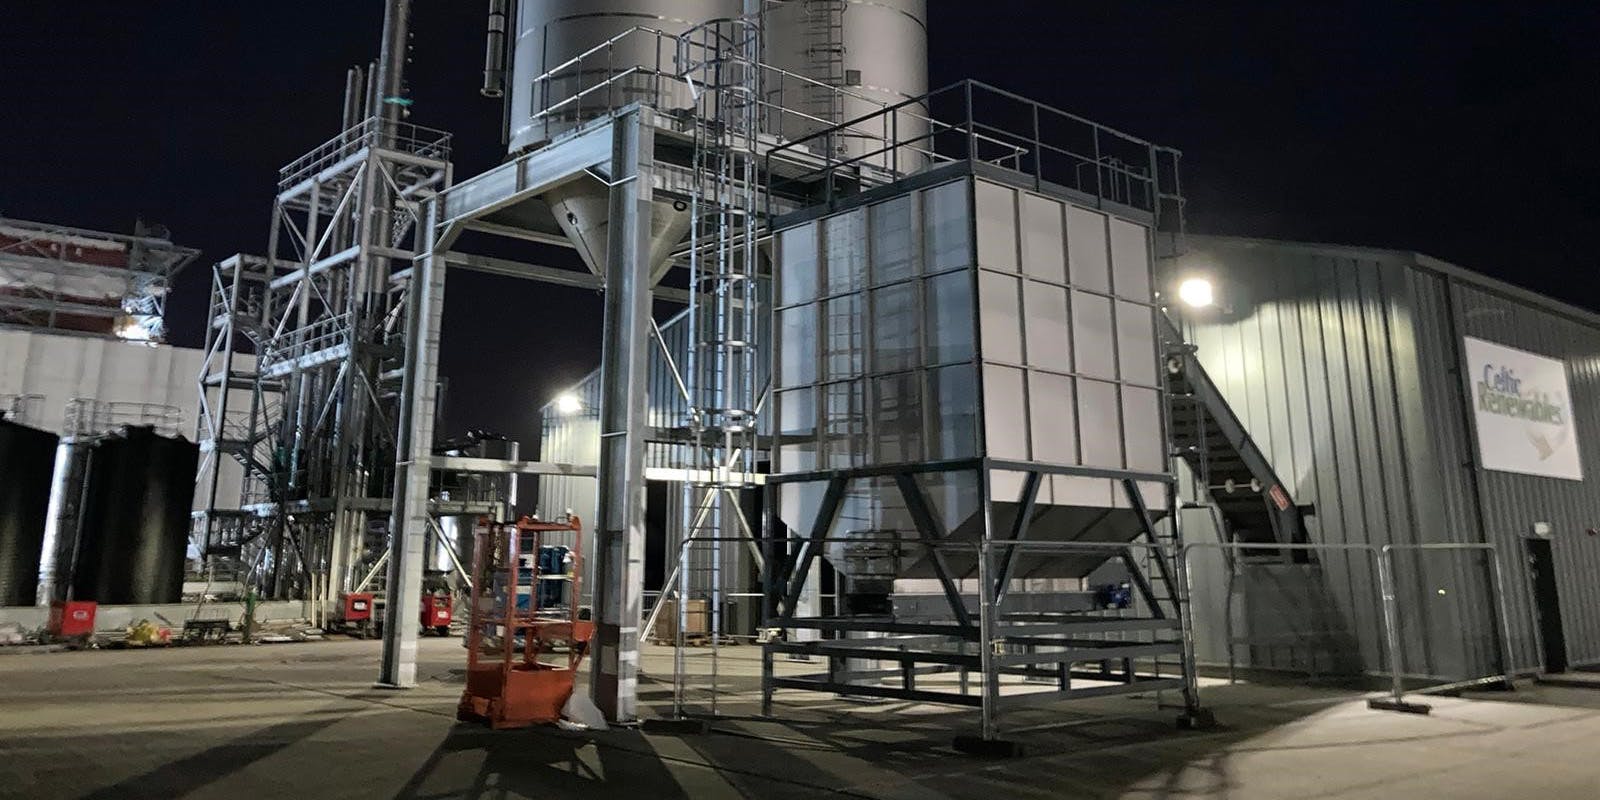 A biofuel production plant in Grangemouth, Scotland